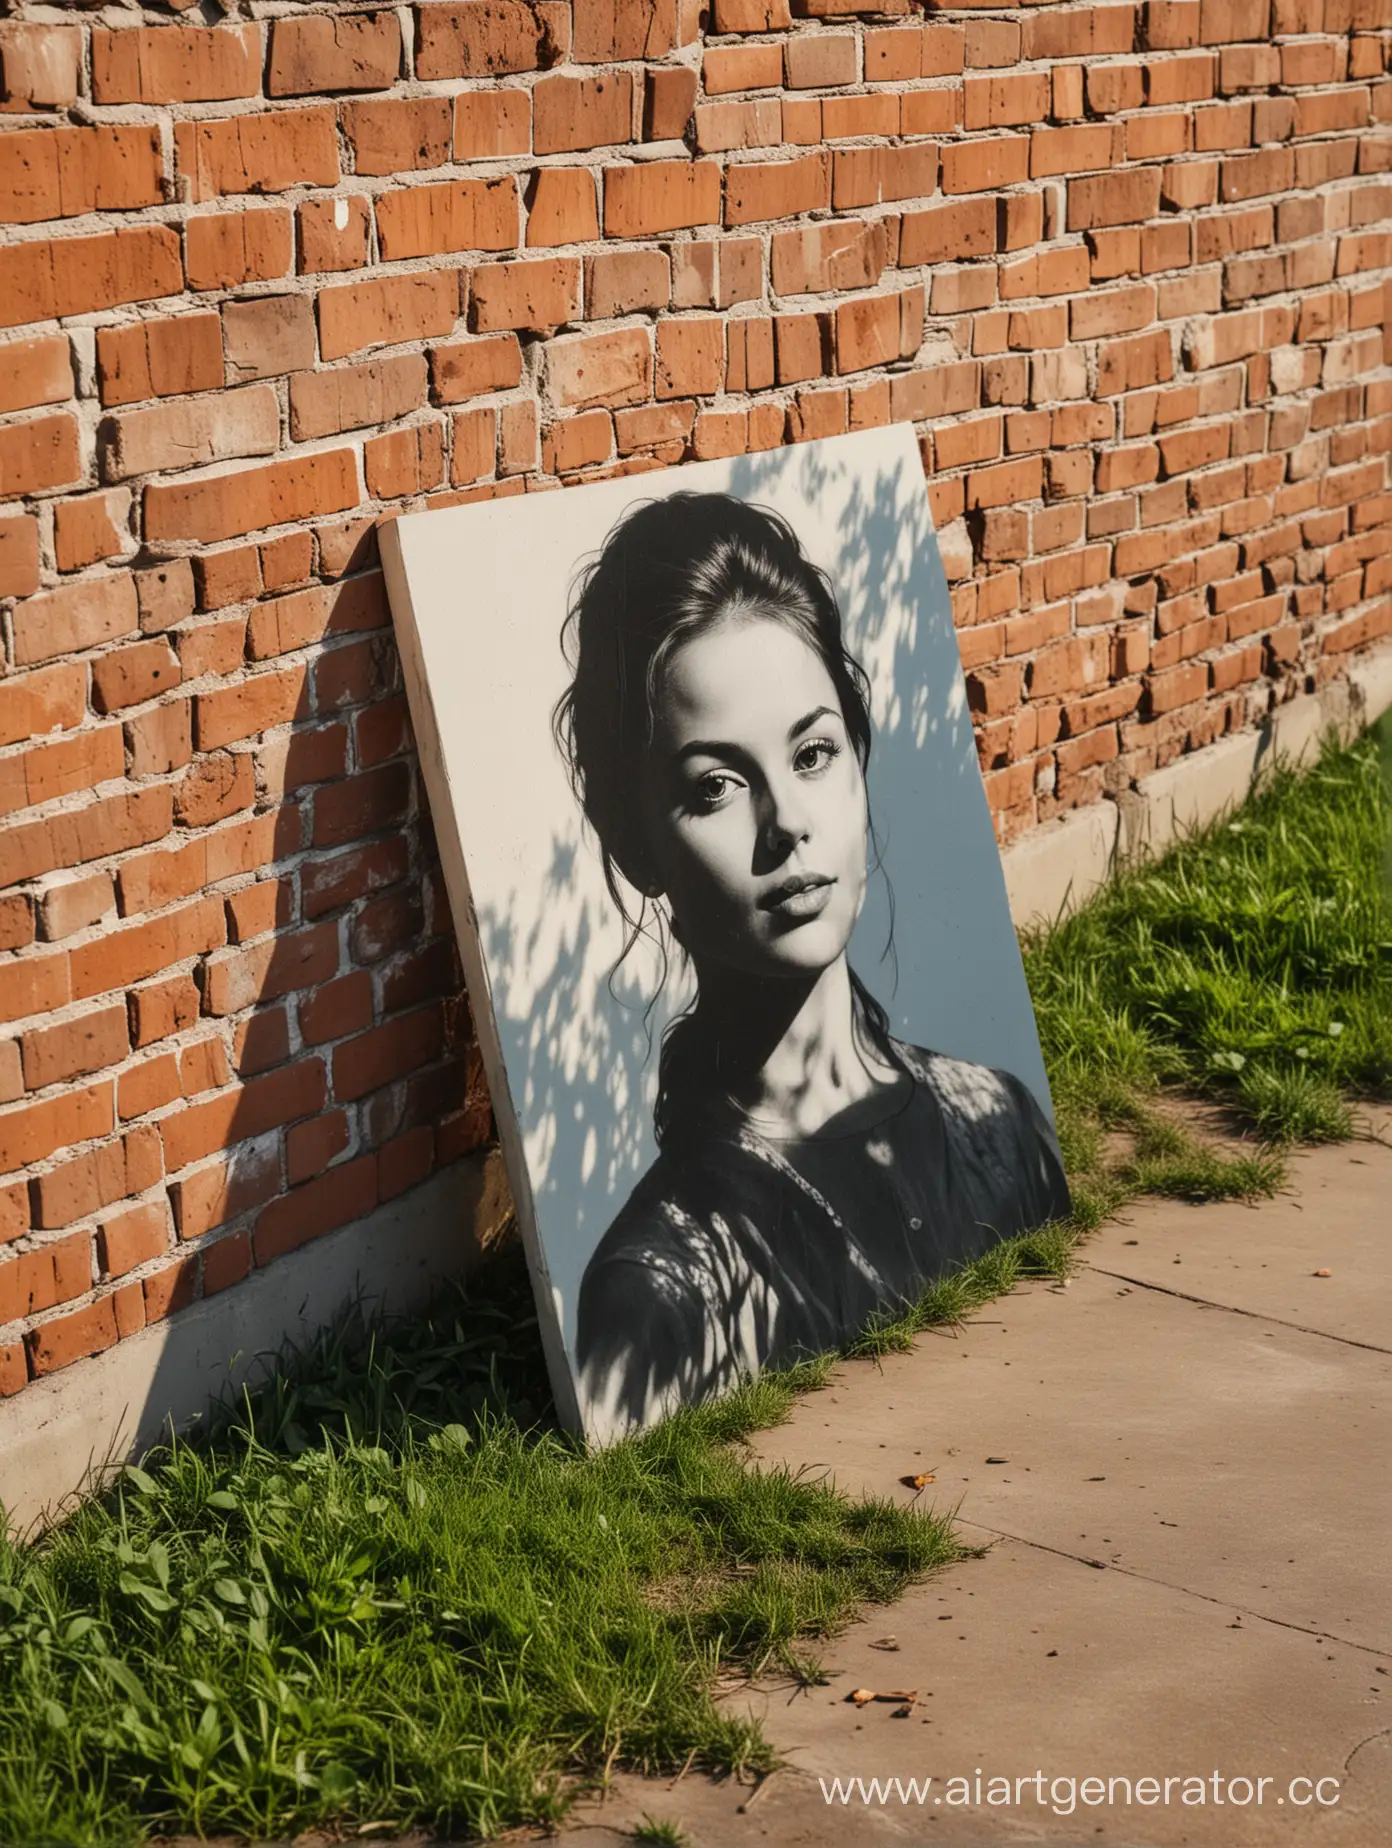 The portrait on canvas stands in the park on the grass leaning against a brick wall. The shadow of the portrait falls on the wall and the ground.